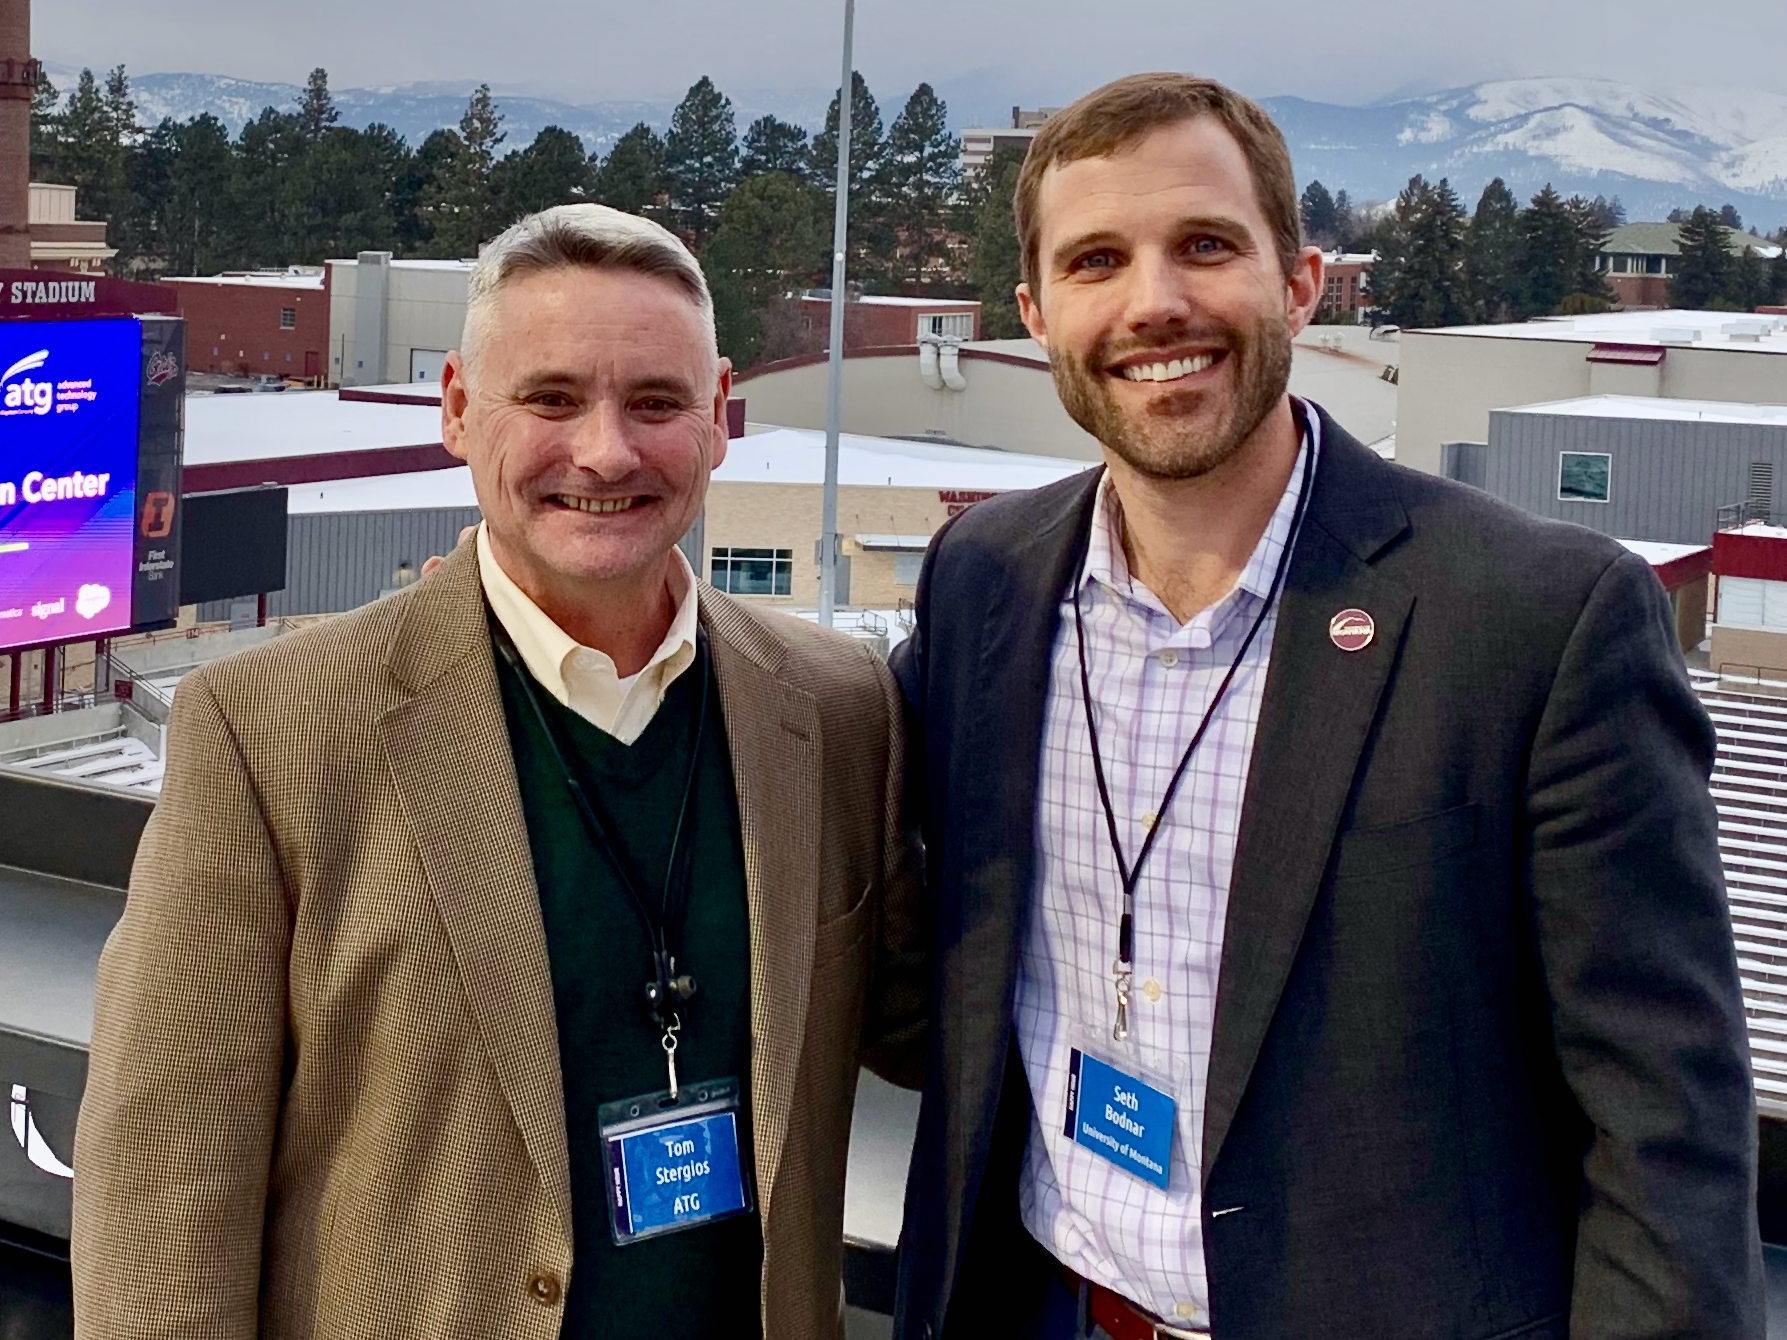 Craton Consulting's Tom Stergios and University of Montana President Seth Bodnar